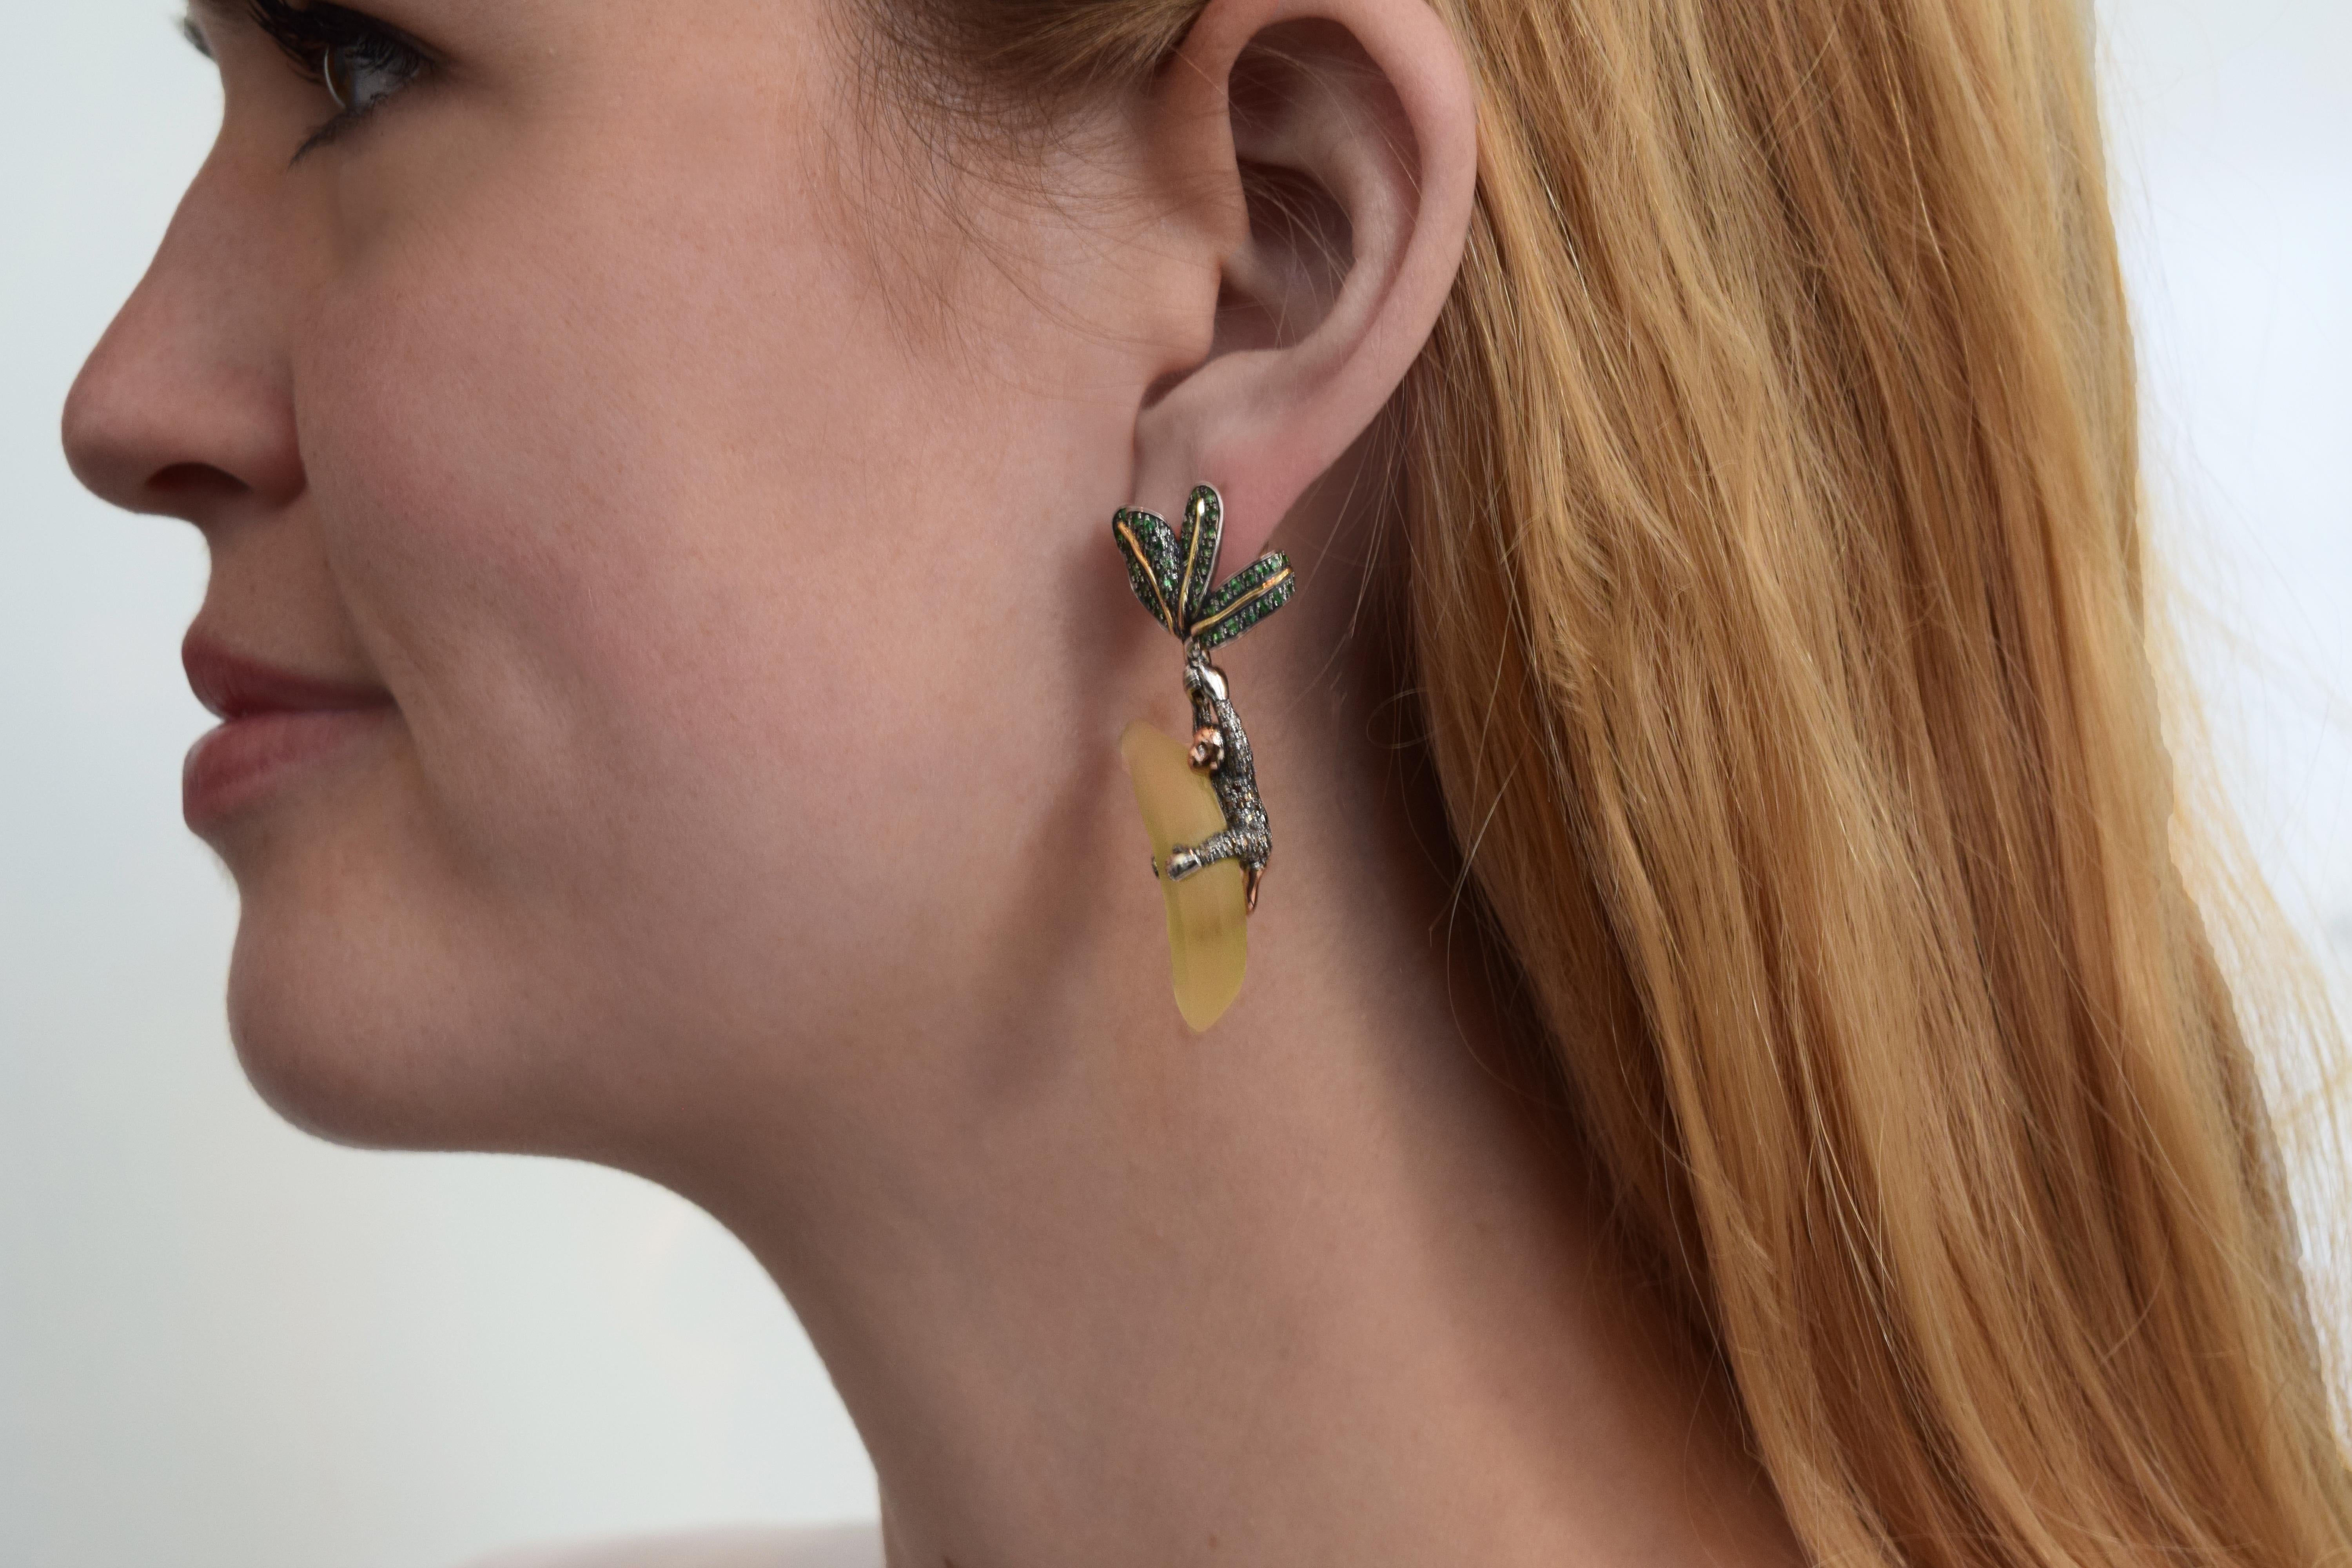 Lemon quartz bananas and green tsavorite-embellished palm leaves bring an optimistic dose of colour to these beautiful drop earrings. Designed in 18k rose and yellow gold and sterling silver, the earrings are fashioned with two brown and white